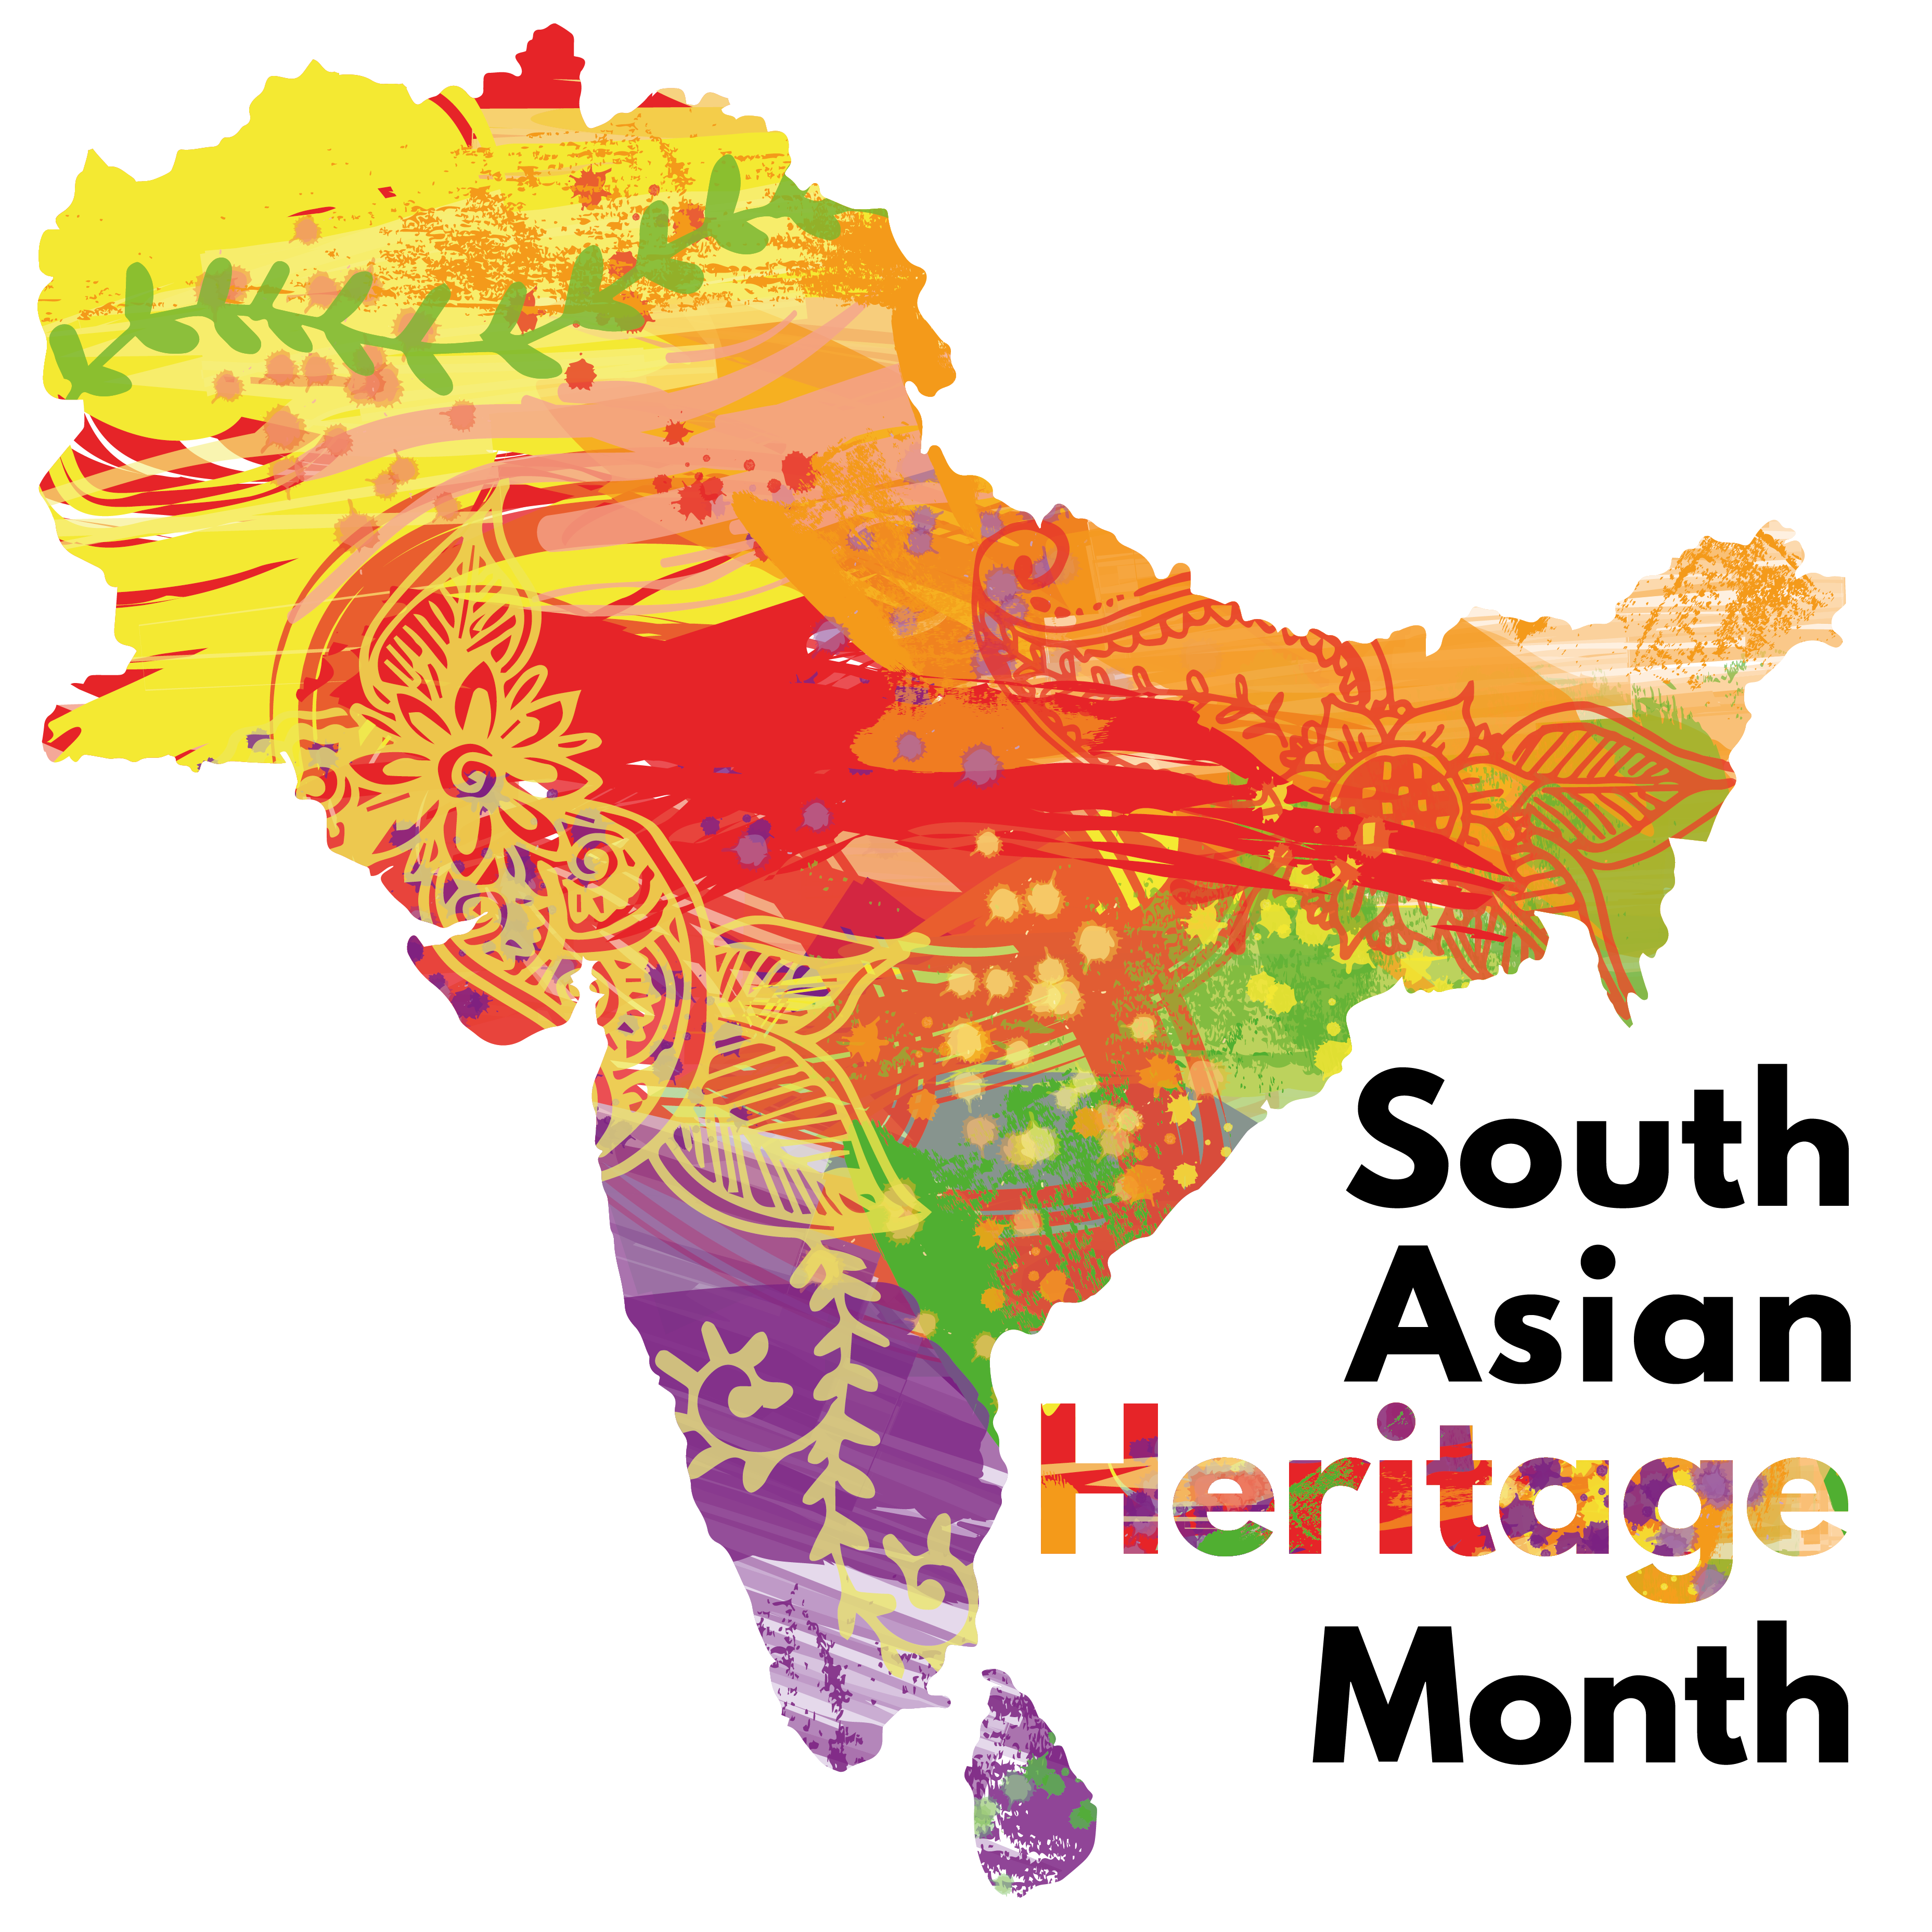 South Asian Heritage Month logo